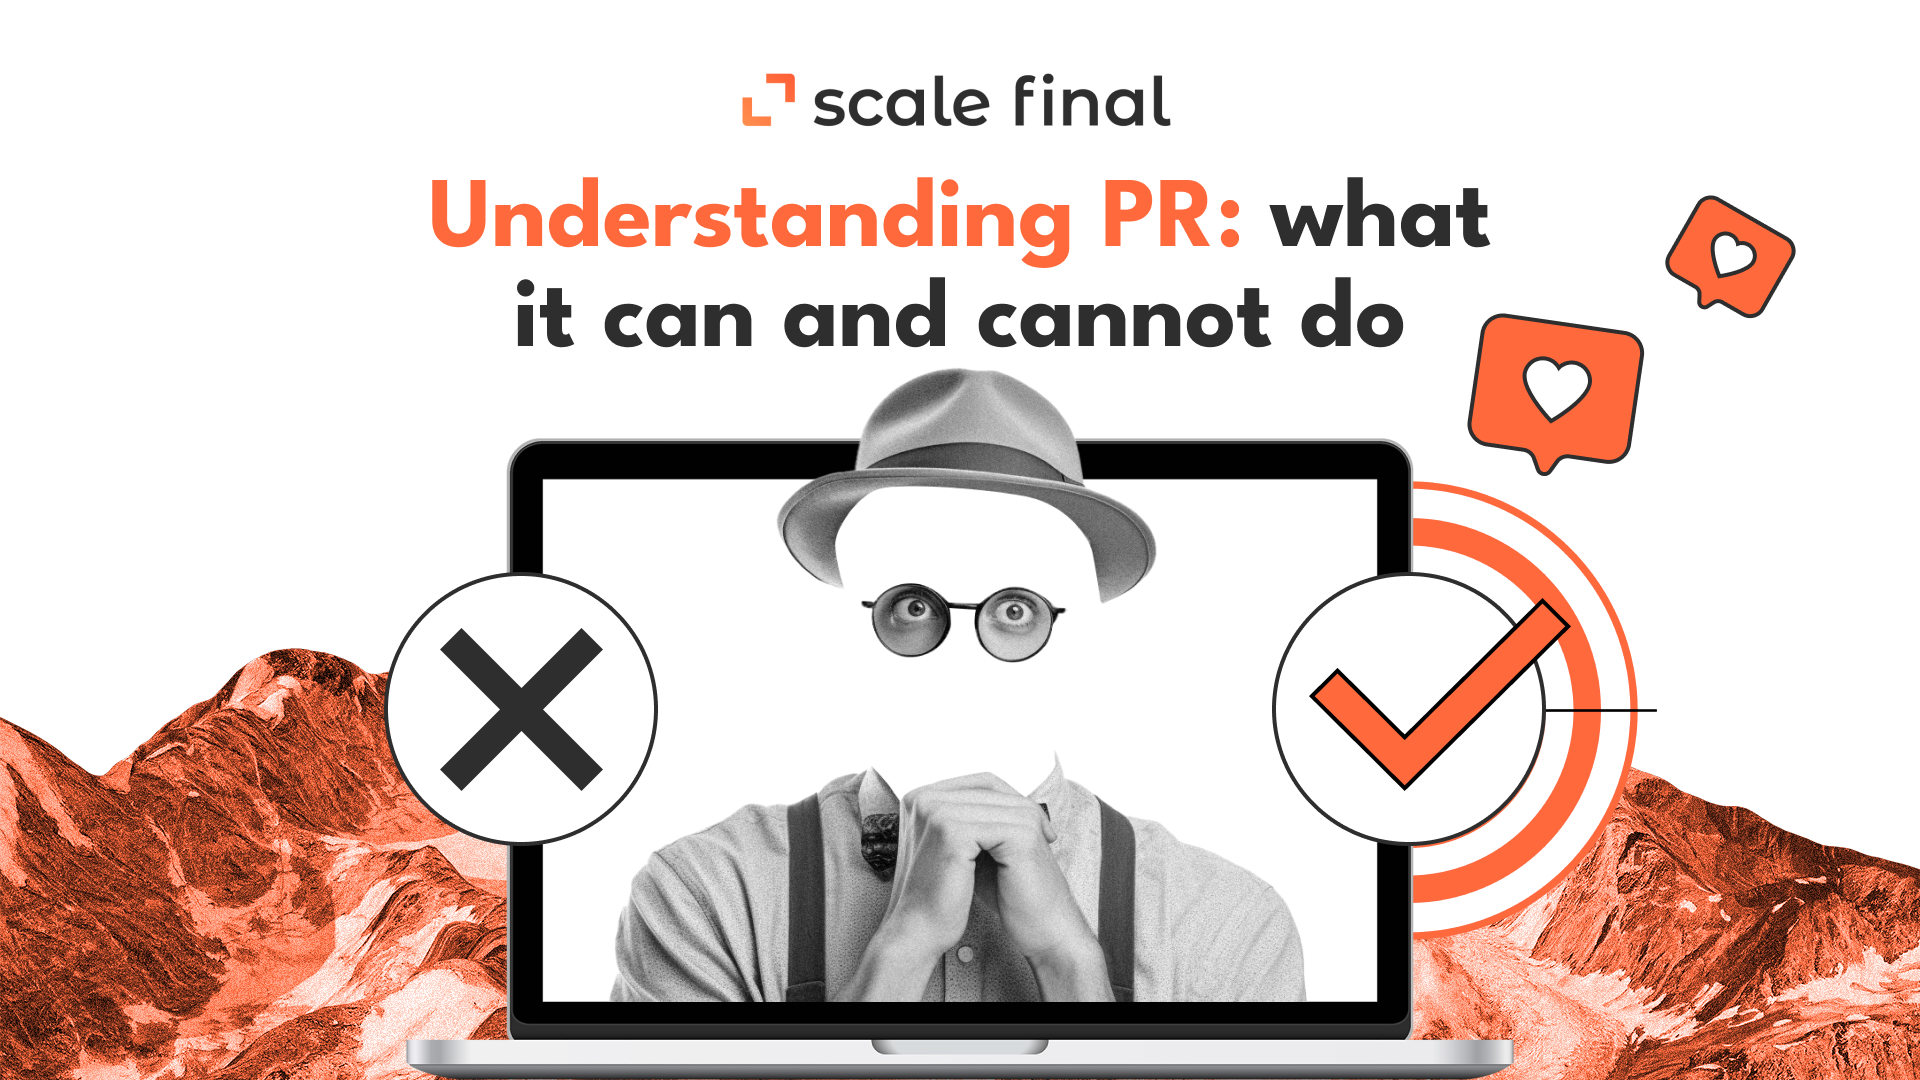 Understanding PR: what it can and cannot do